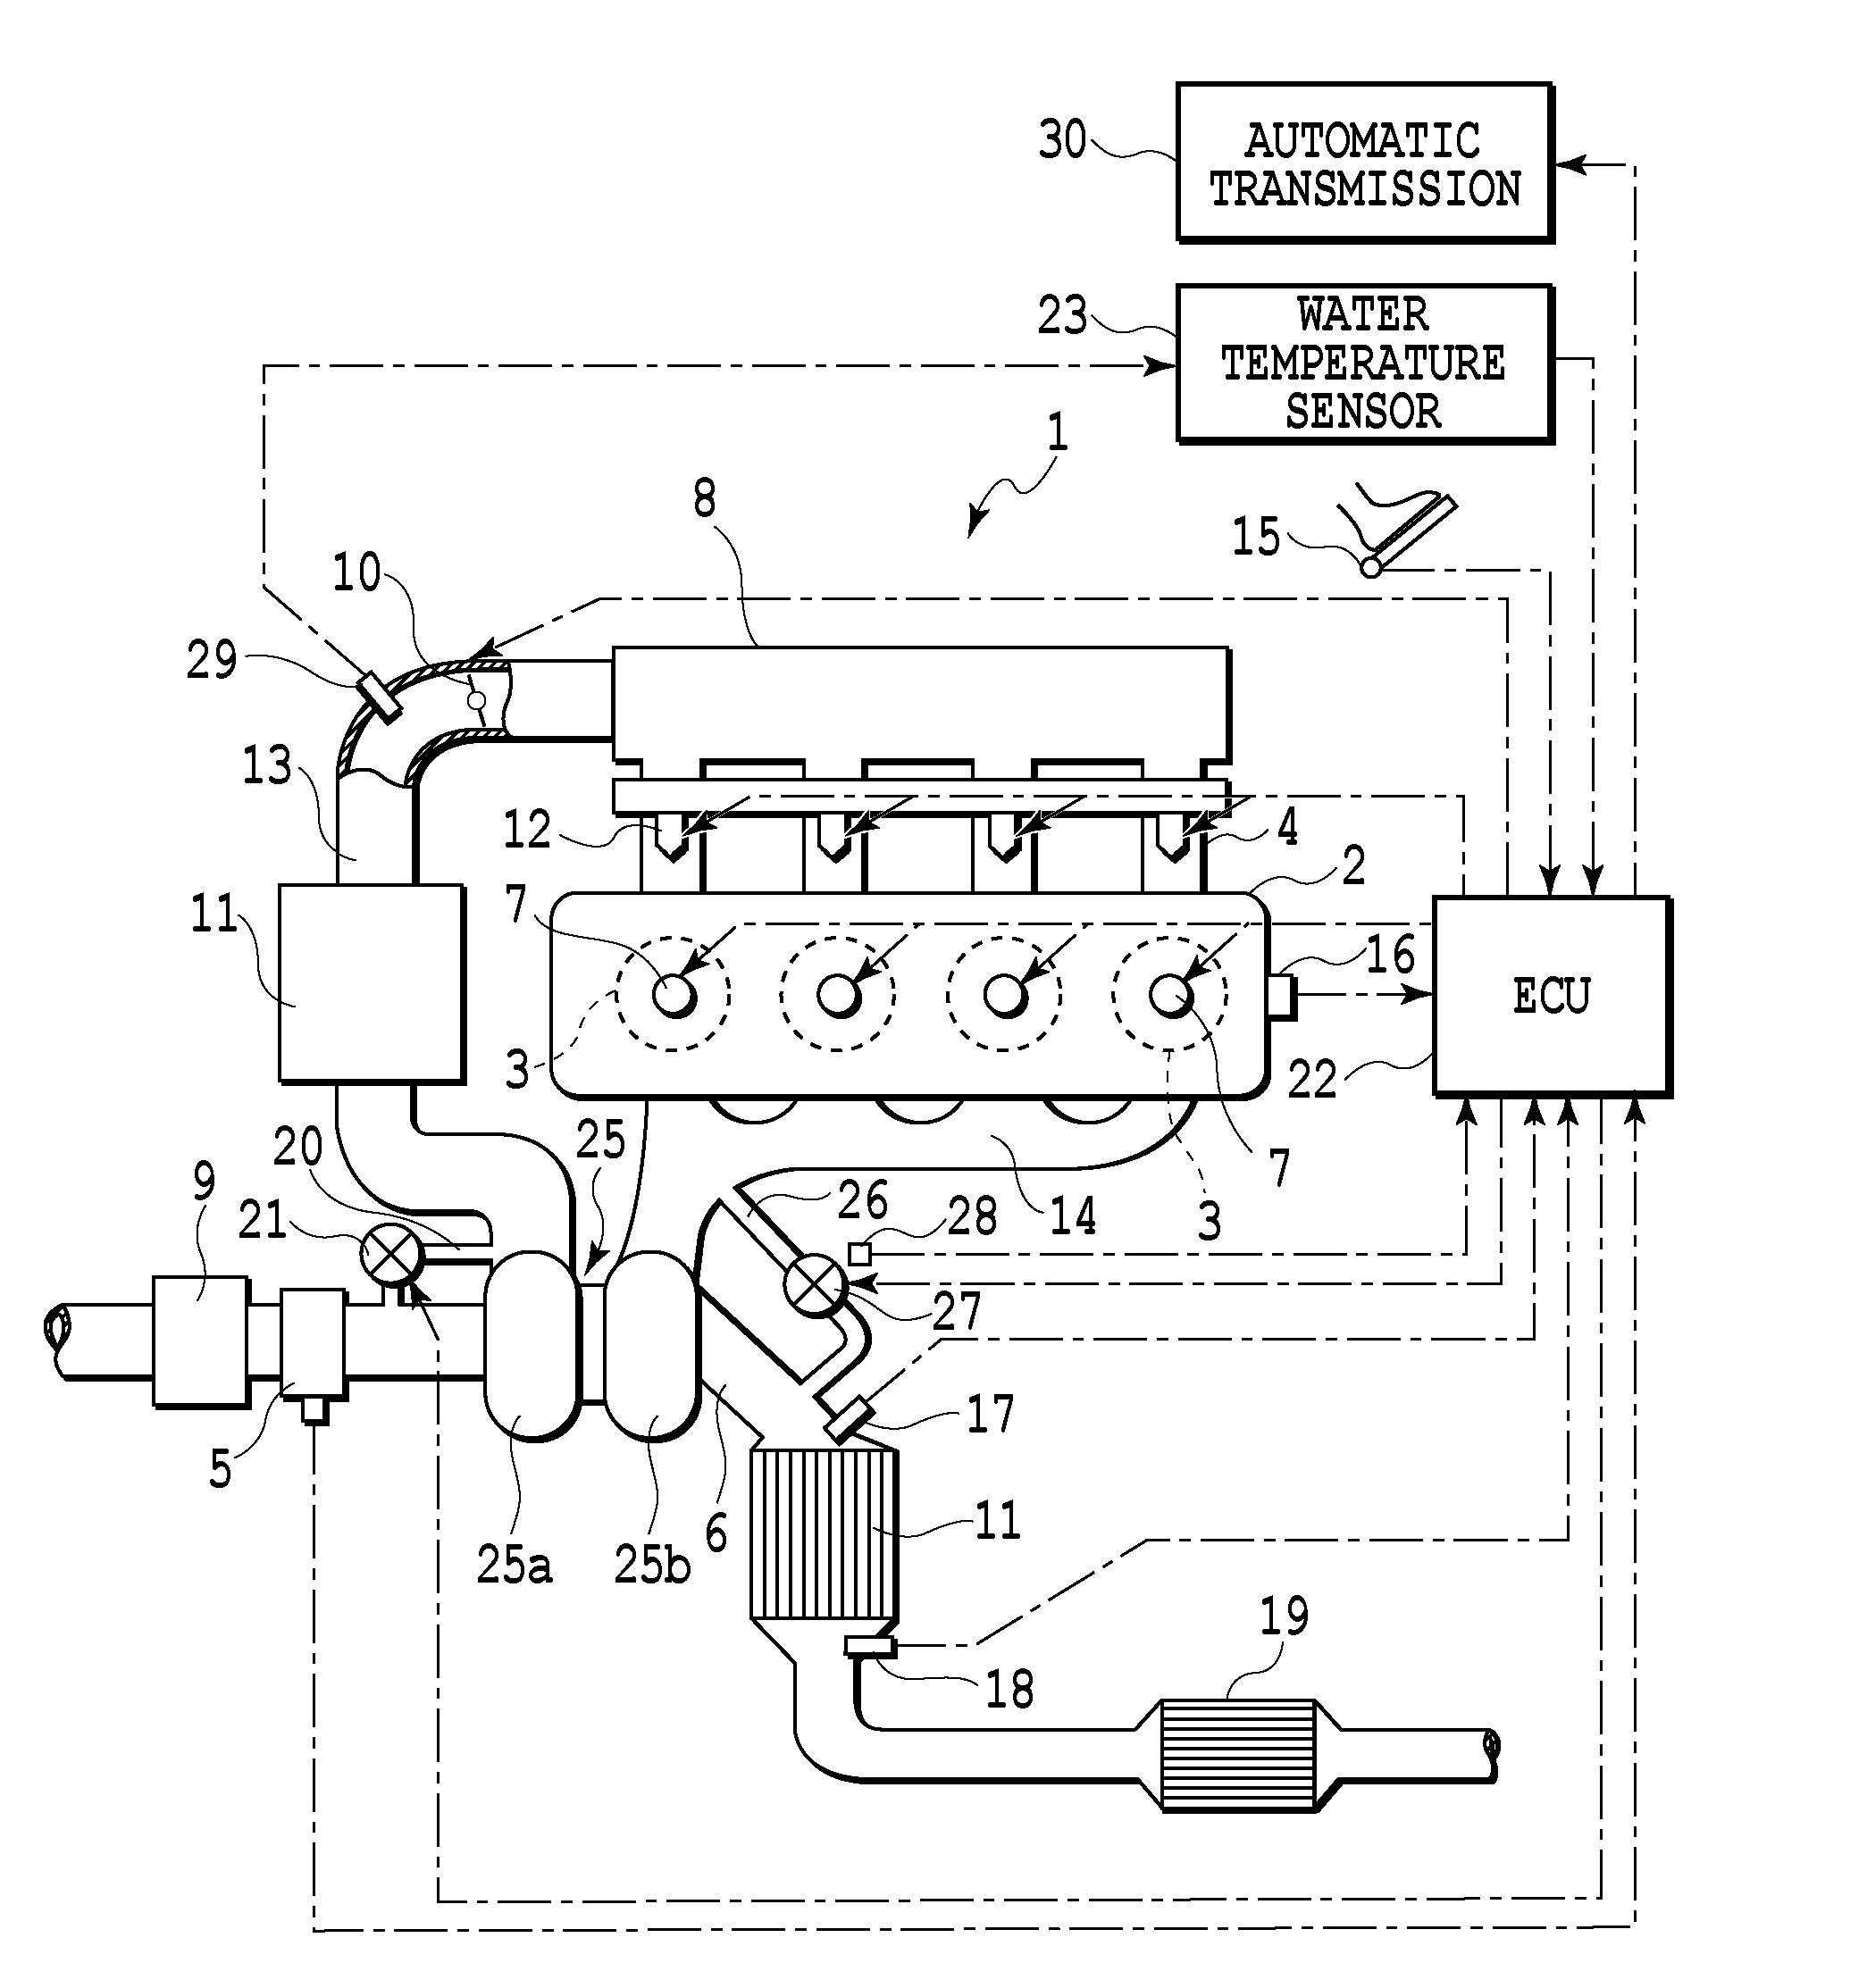 Apparatus for detecting inter-cylinder air-fuel ratio imbalance in multi-cylinder internal combustion engine